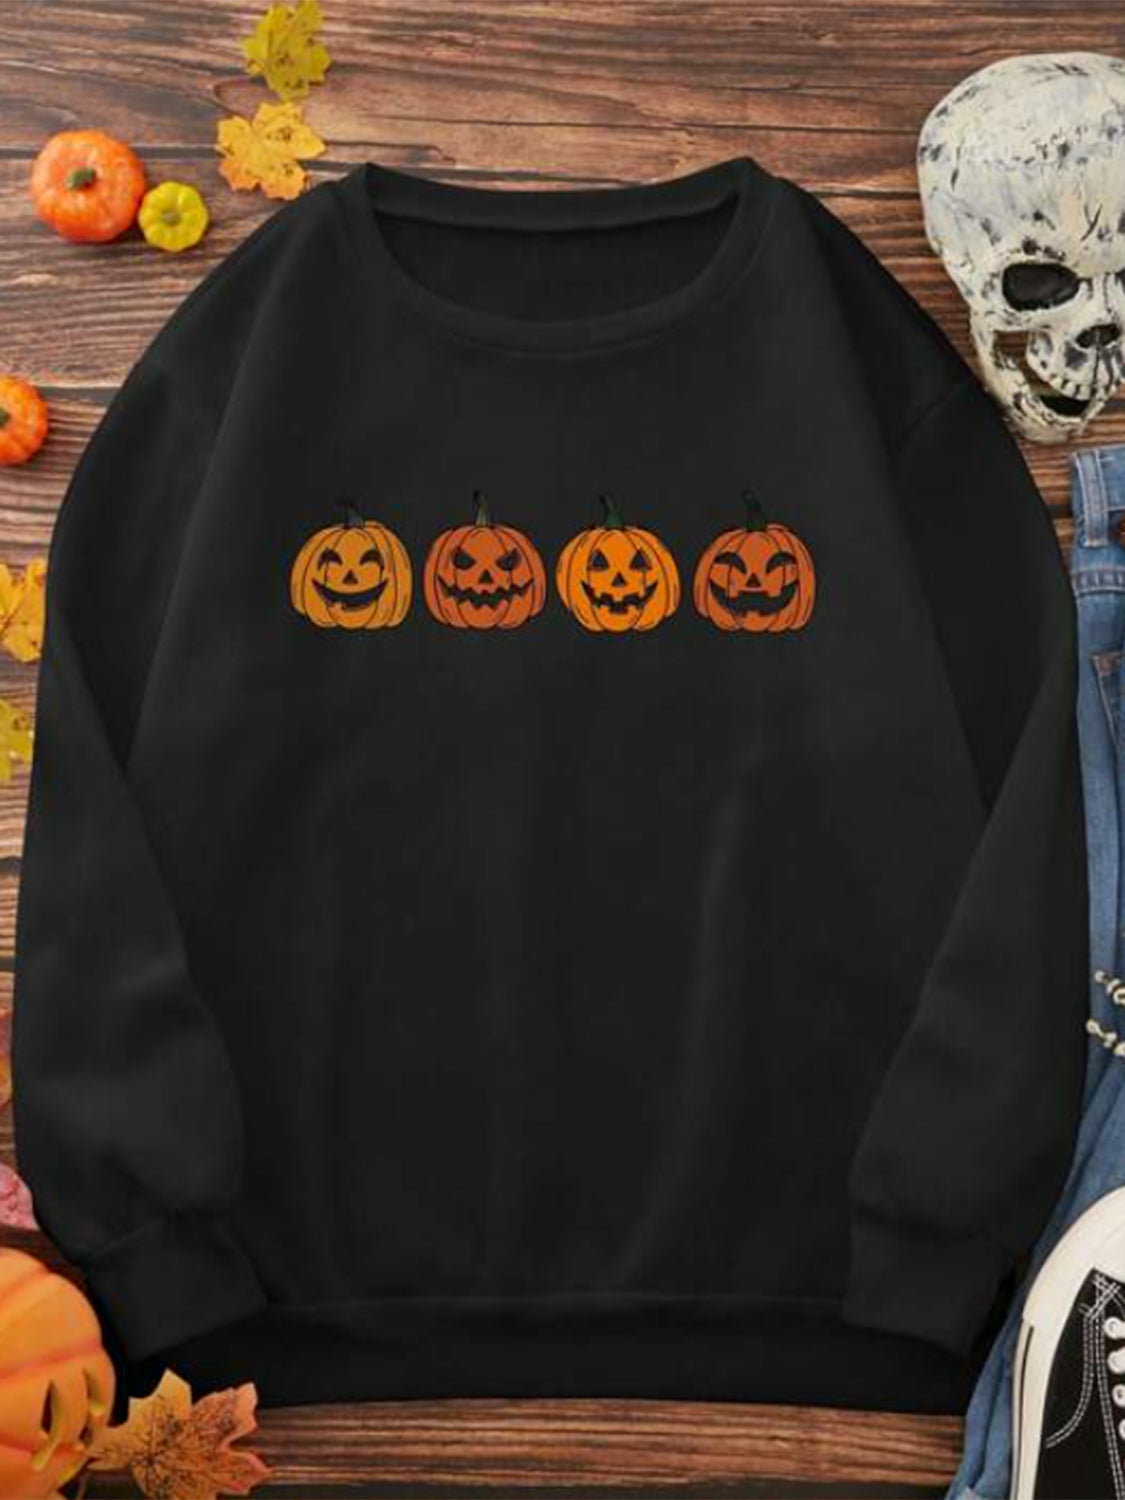 Simply Love Full Size Jack-O'-Lantern Graphic T-Shirt BLUE ZONE PLANET